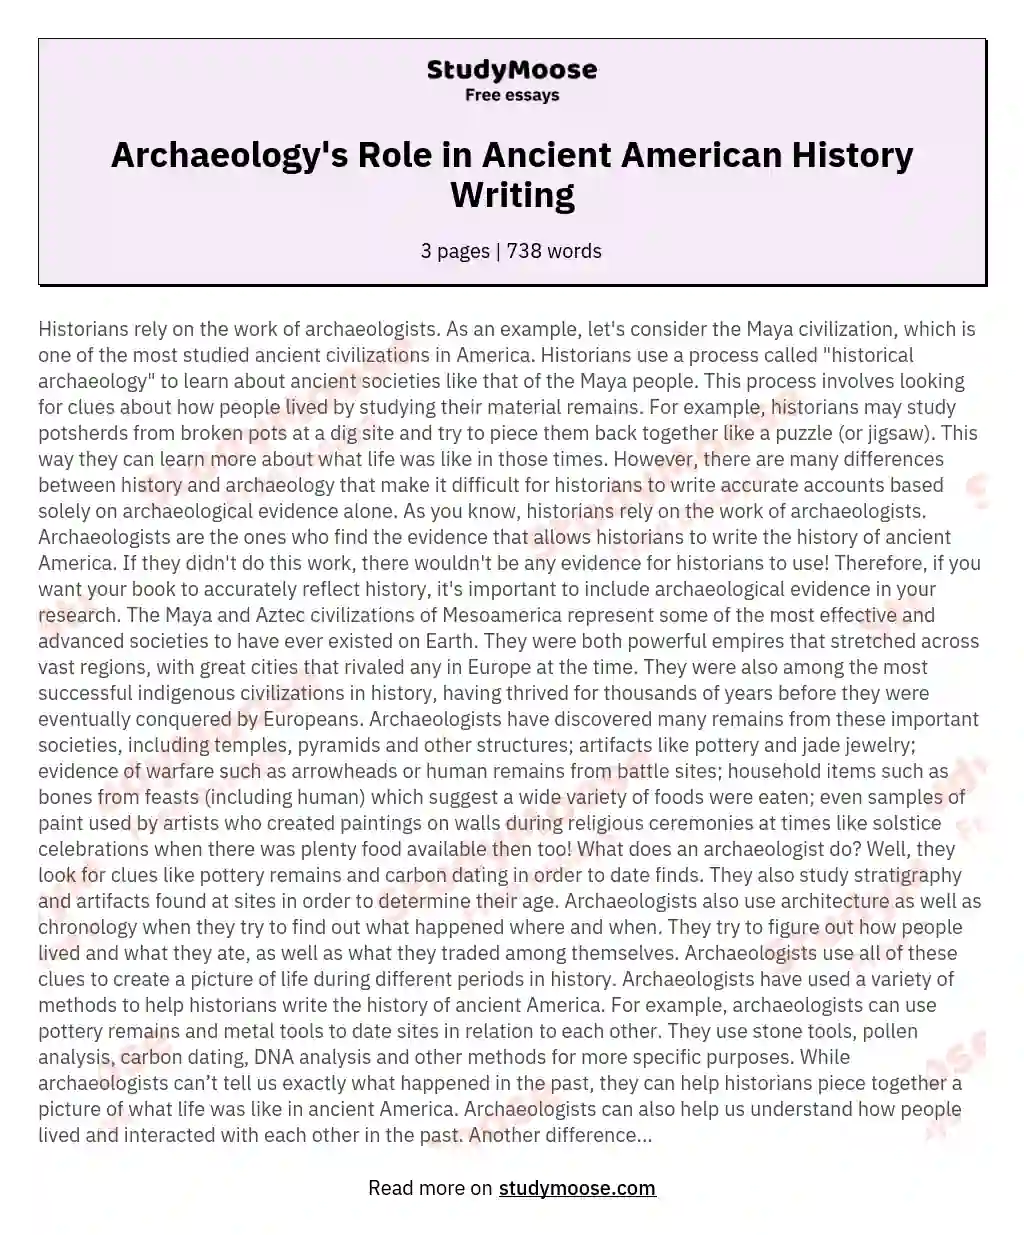 Archaeology's Role in Ancient American History Writing essay